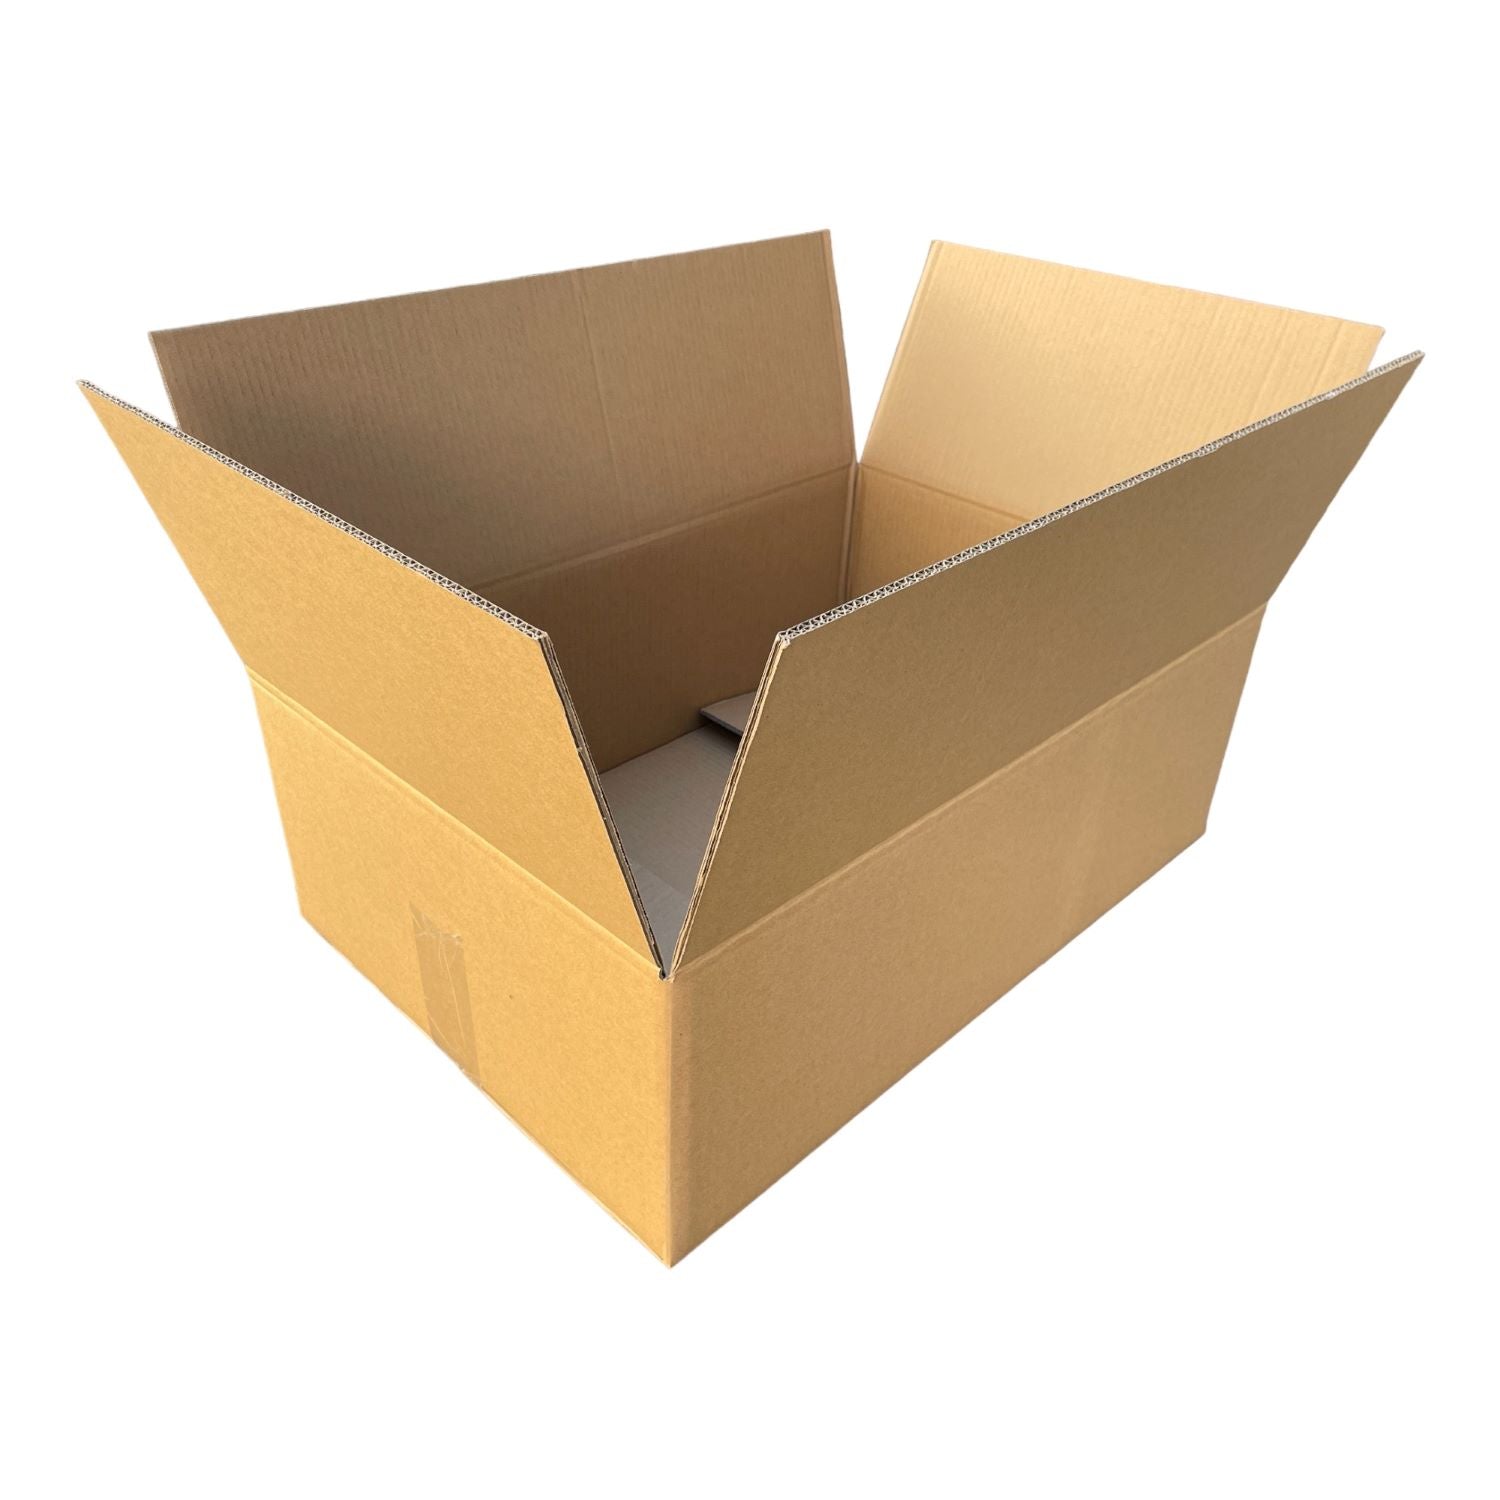 10 -12x12x14 Corrugated Boxes -New for Moving or Shipping Needs